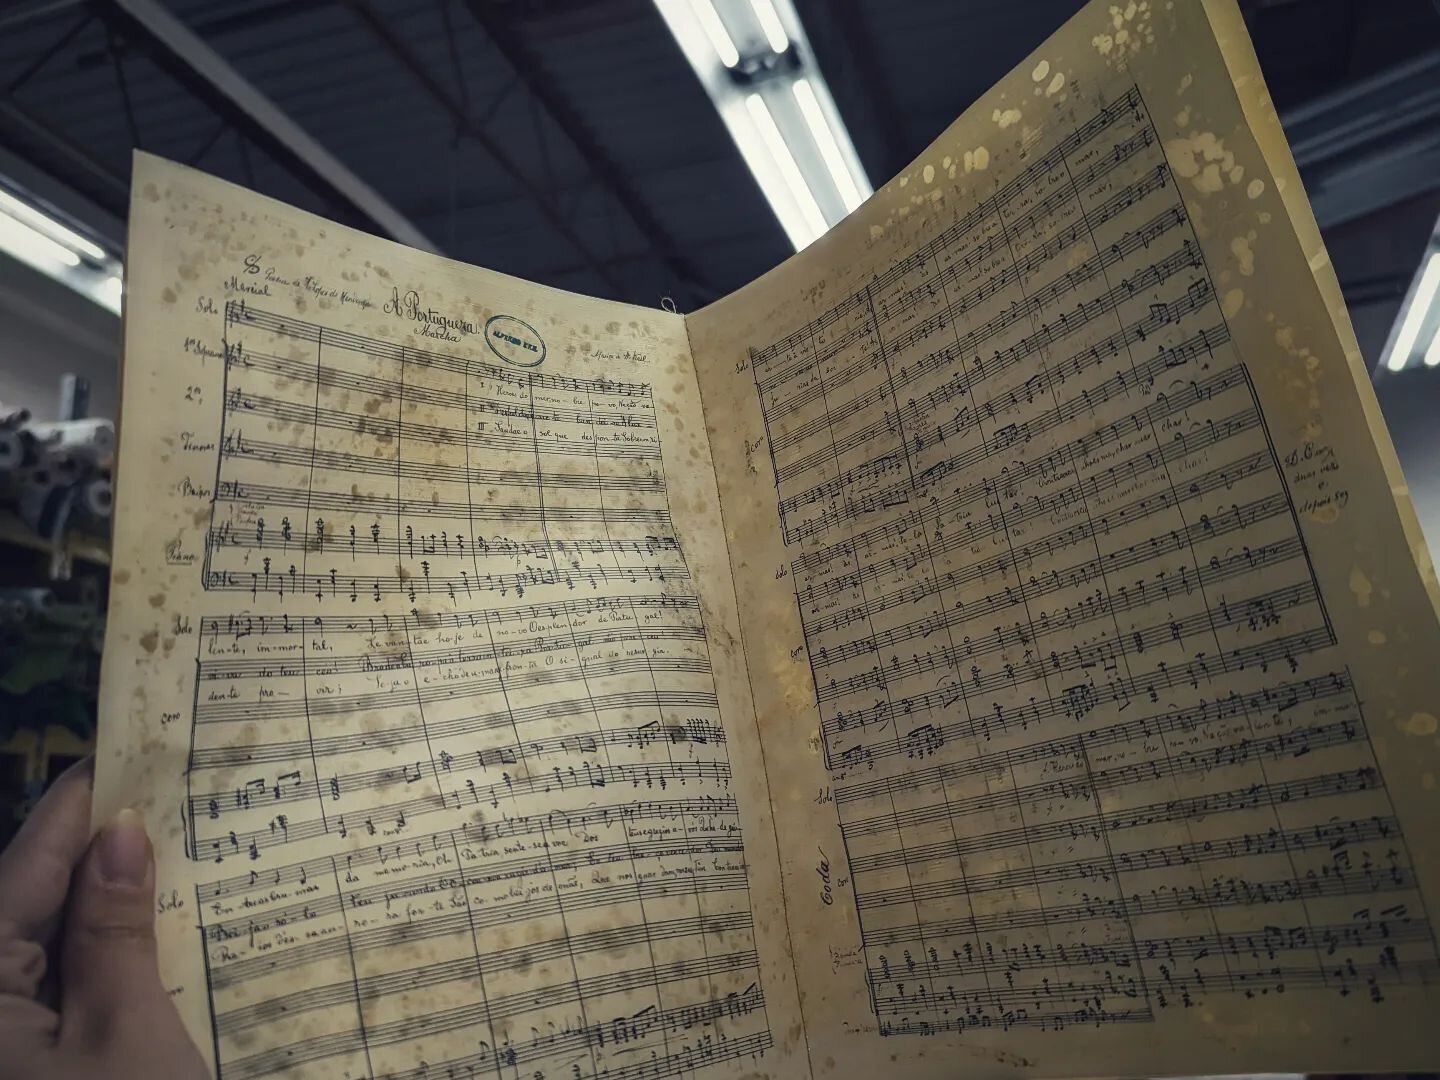 Some Paper Props for Amadeus! 
Sourced from a variety of Mozart's original compositions from archival scans.
printed, waxed, stitched, and distressed over 130 pages of music 

Props Team ------
Properties Director: @propsbybecky
Assistant Properties 